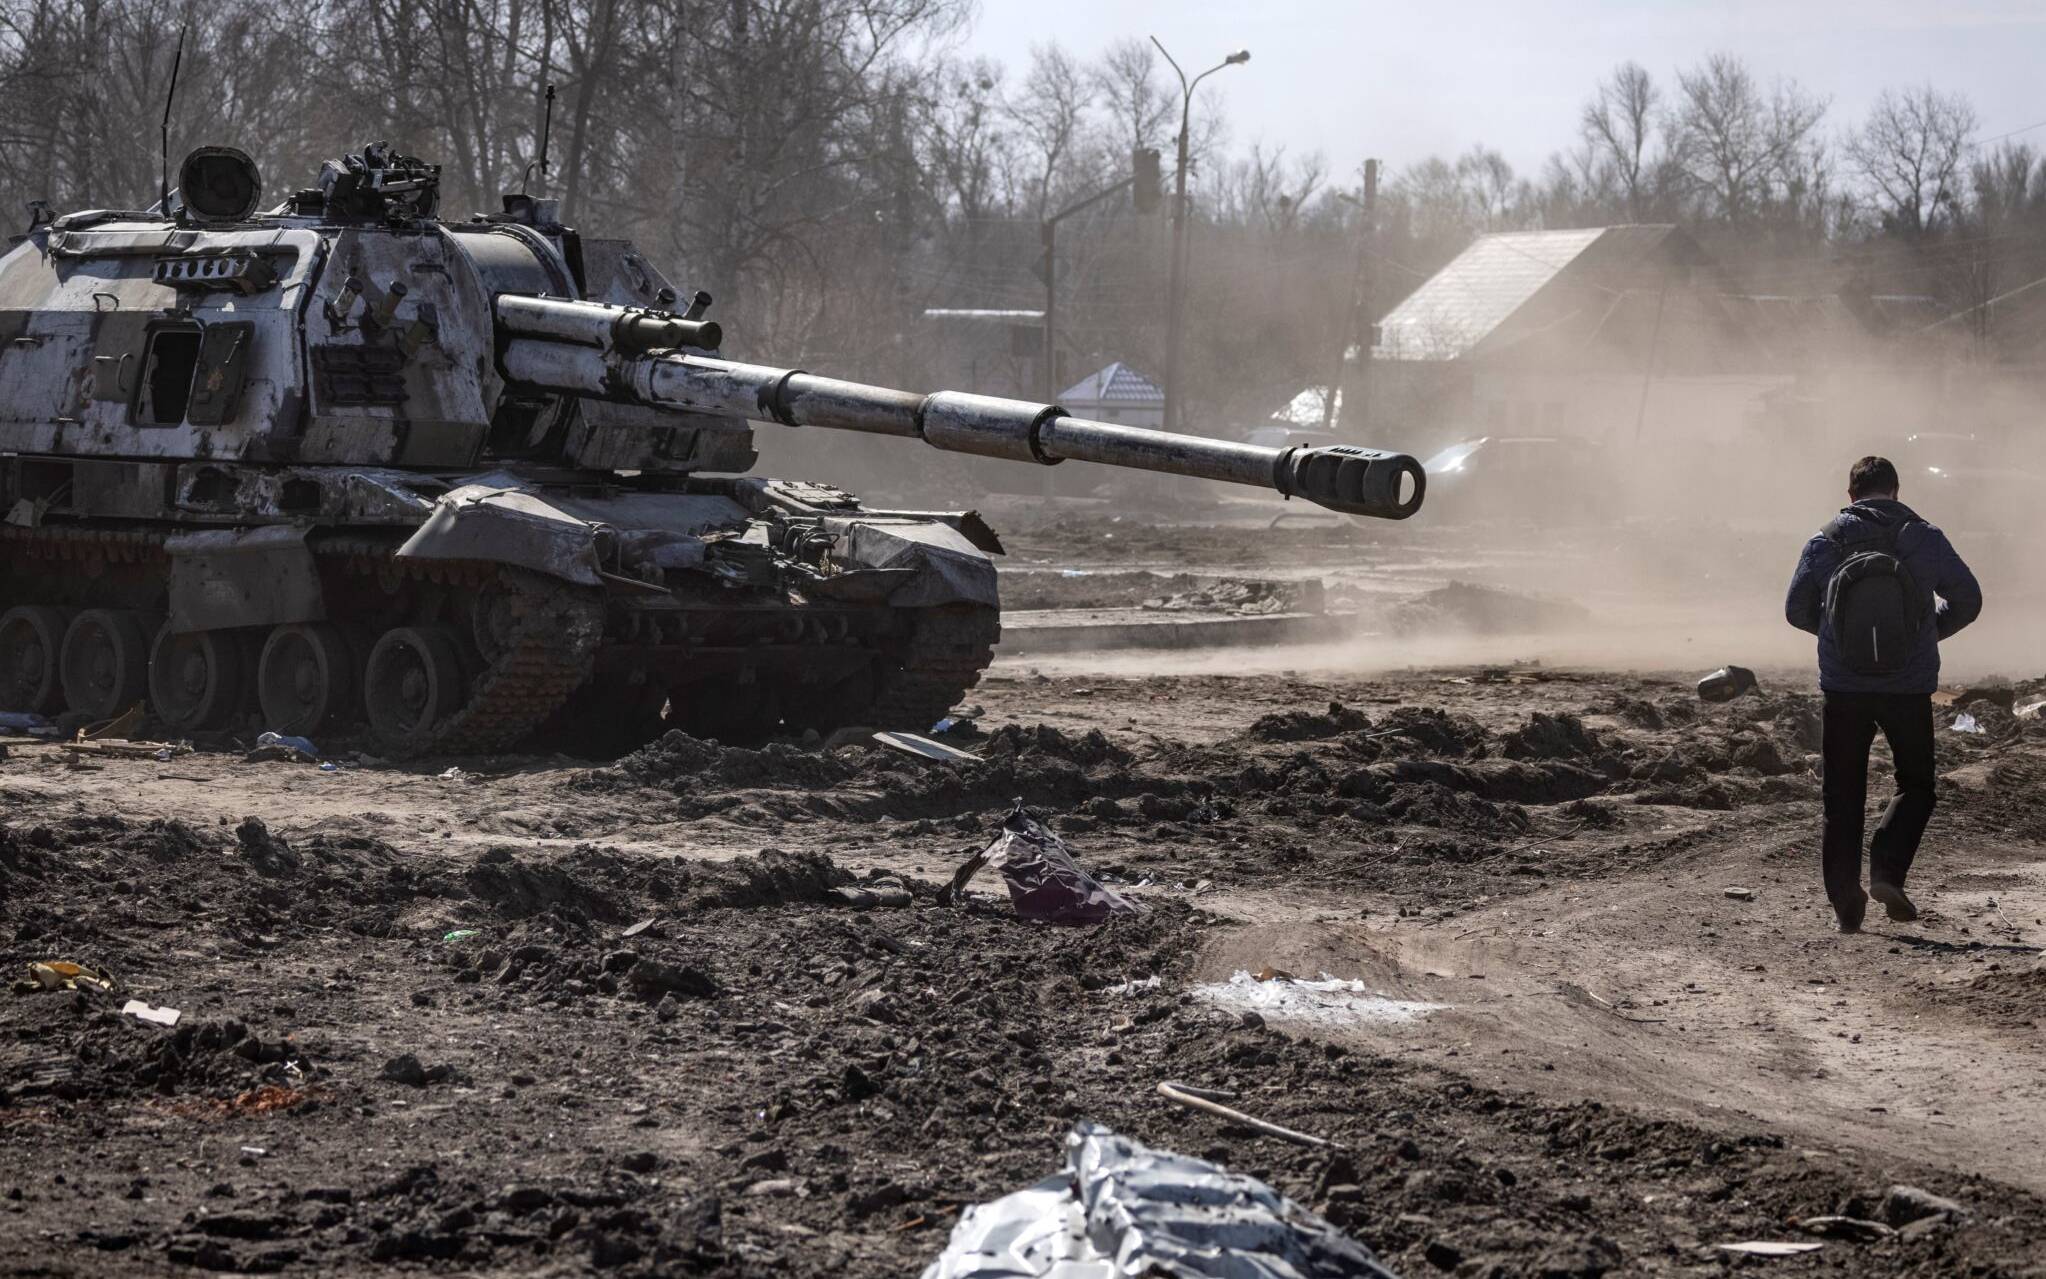 A resident walks near a damaged Russian tank in the northeastern city of Trostyanets', on March 29, 2022. - Ukraine said on March 26, 2022 its forces had recaptured the town of Trostyanets, near the Russian border, one of the first towns to fall under Moscow's control in its month-long invasion. (Photo by FADEL SENNA / AFP)